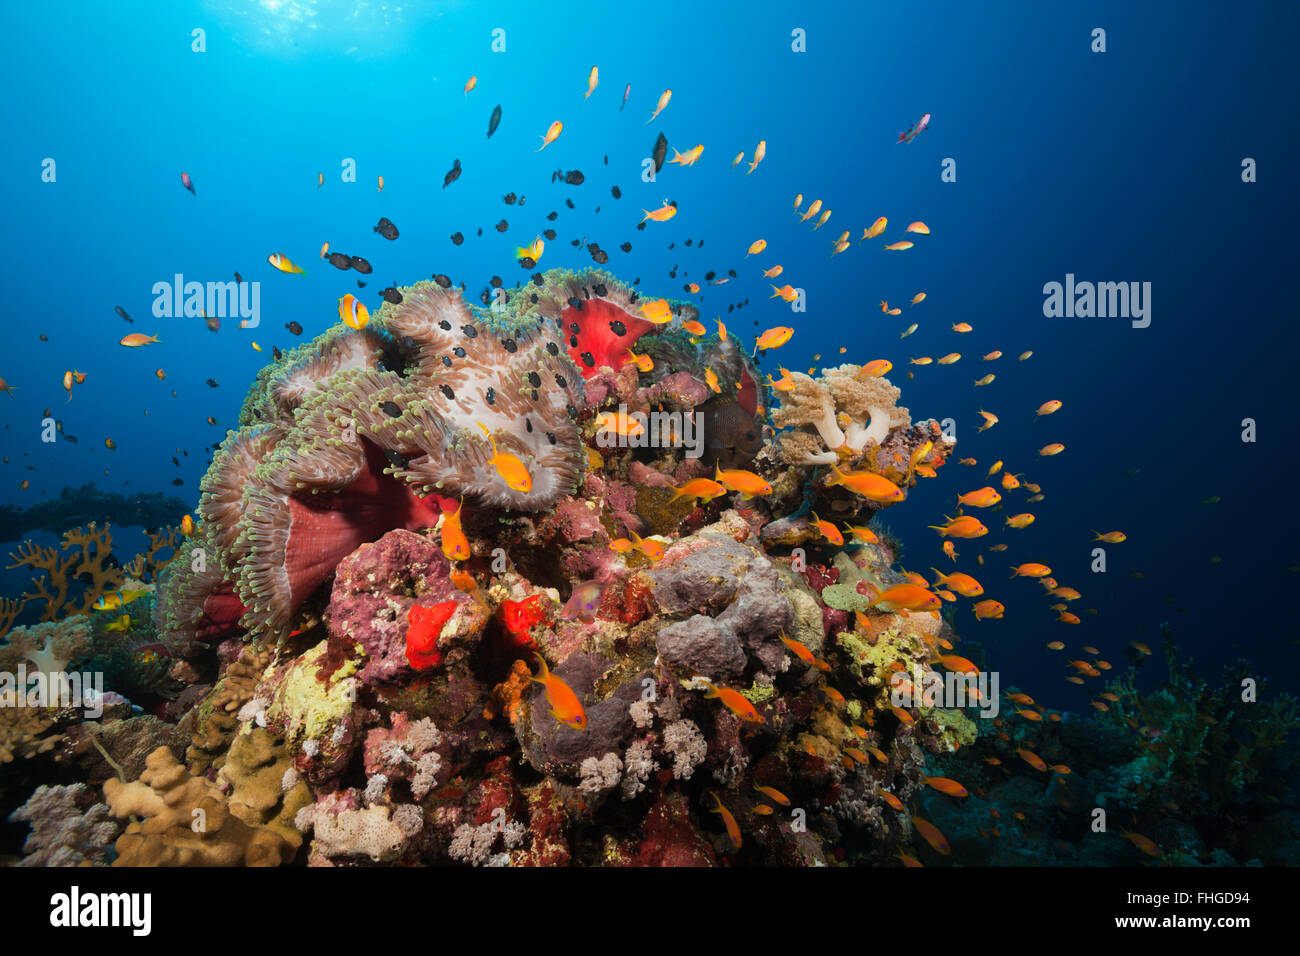 Twobar Anemonefish in Coral Reef, Amphiprion bicinctus, Red Sea, Ras Mohammed, Egypt Stock Photo